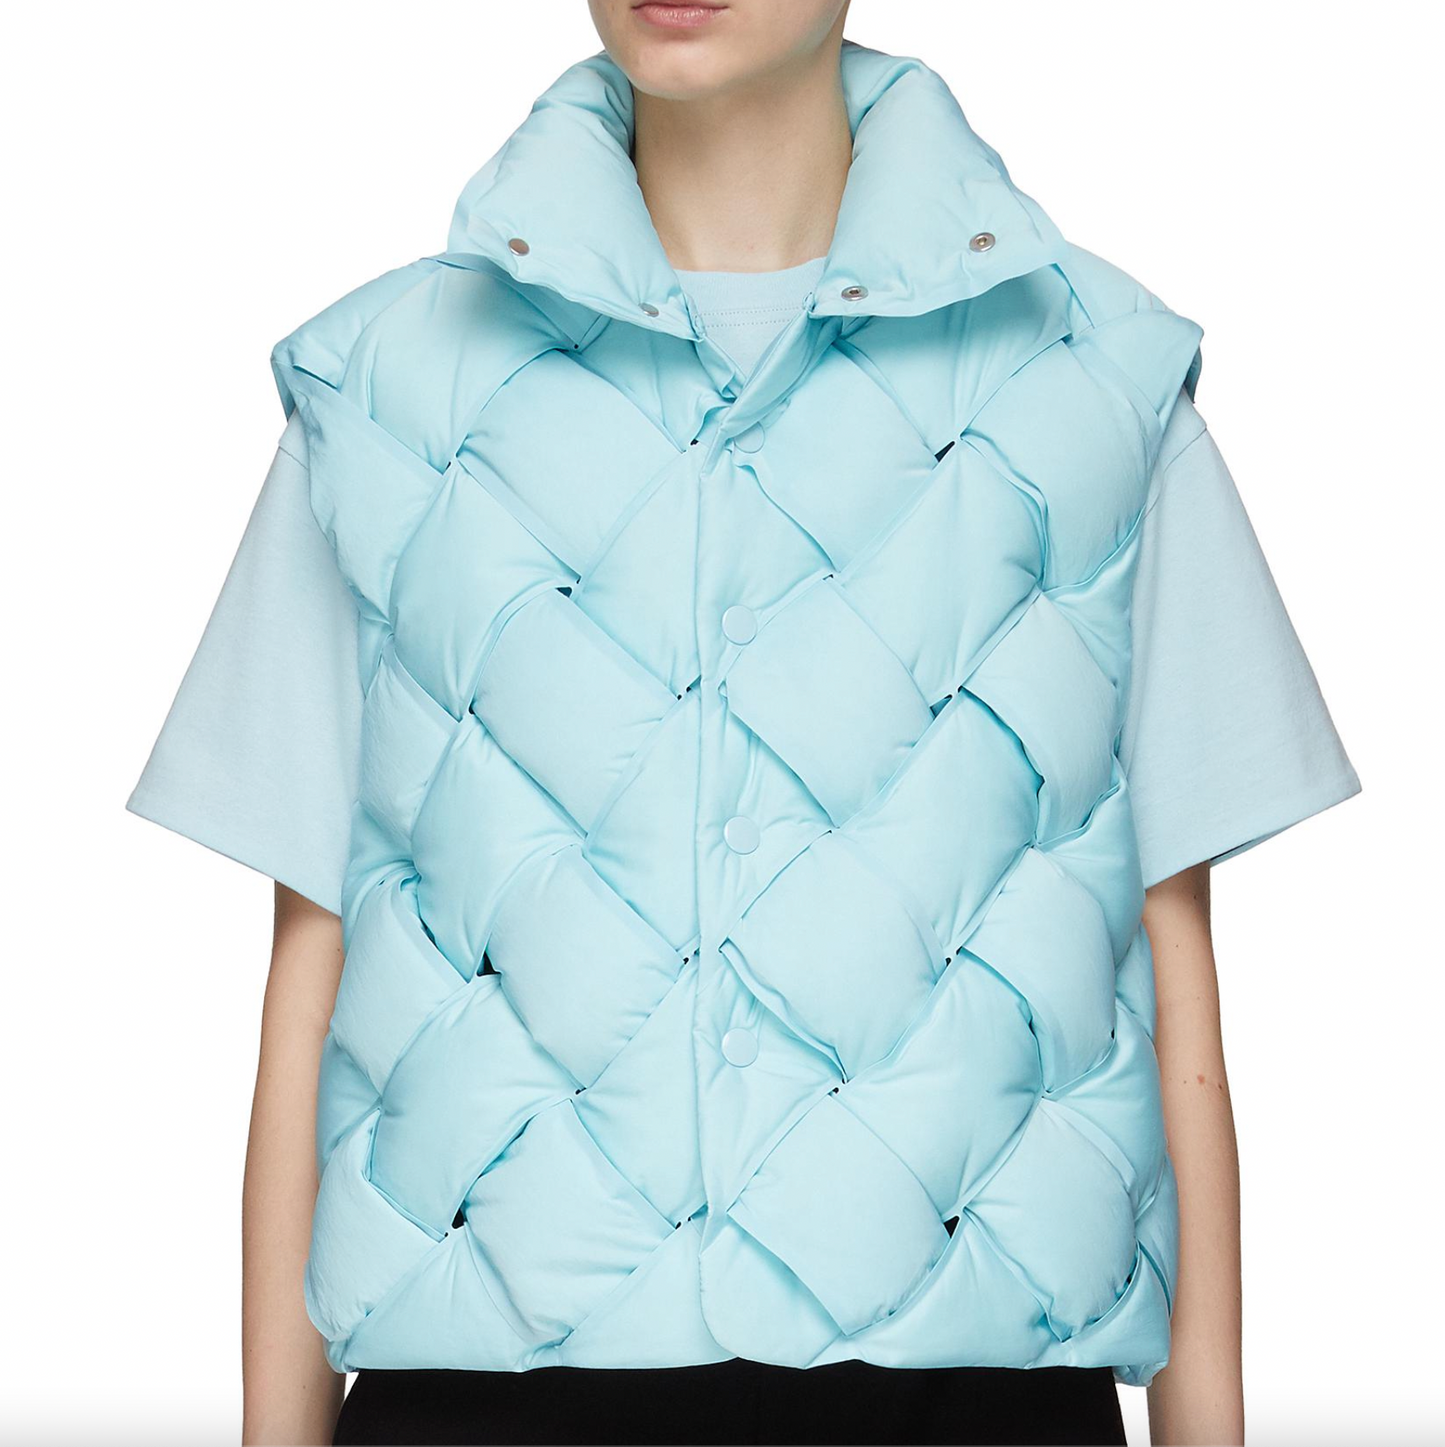 INTRECCIATO PADDED SHELL GILET - PALE BLUE